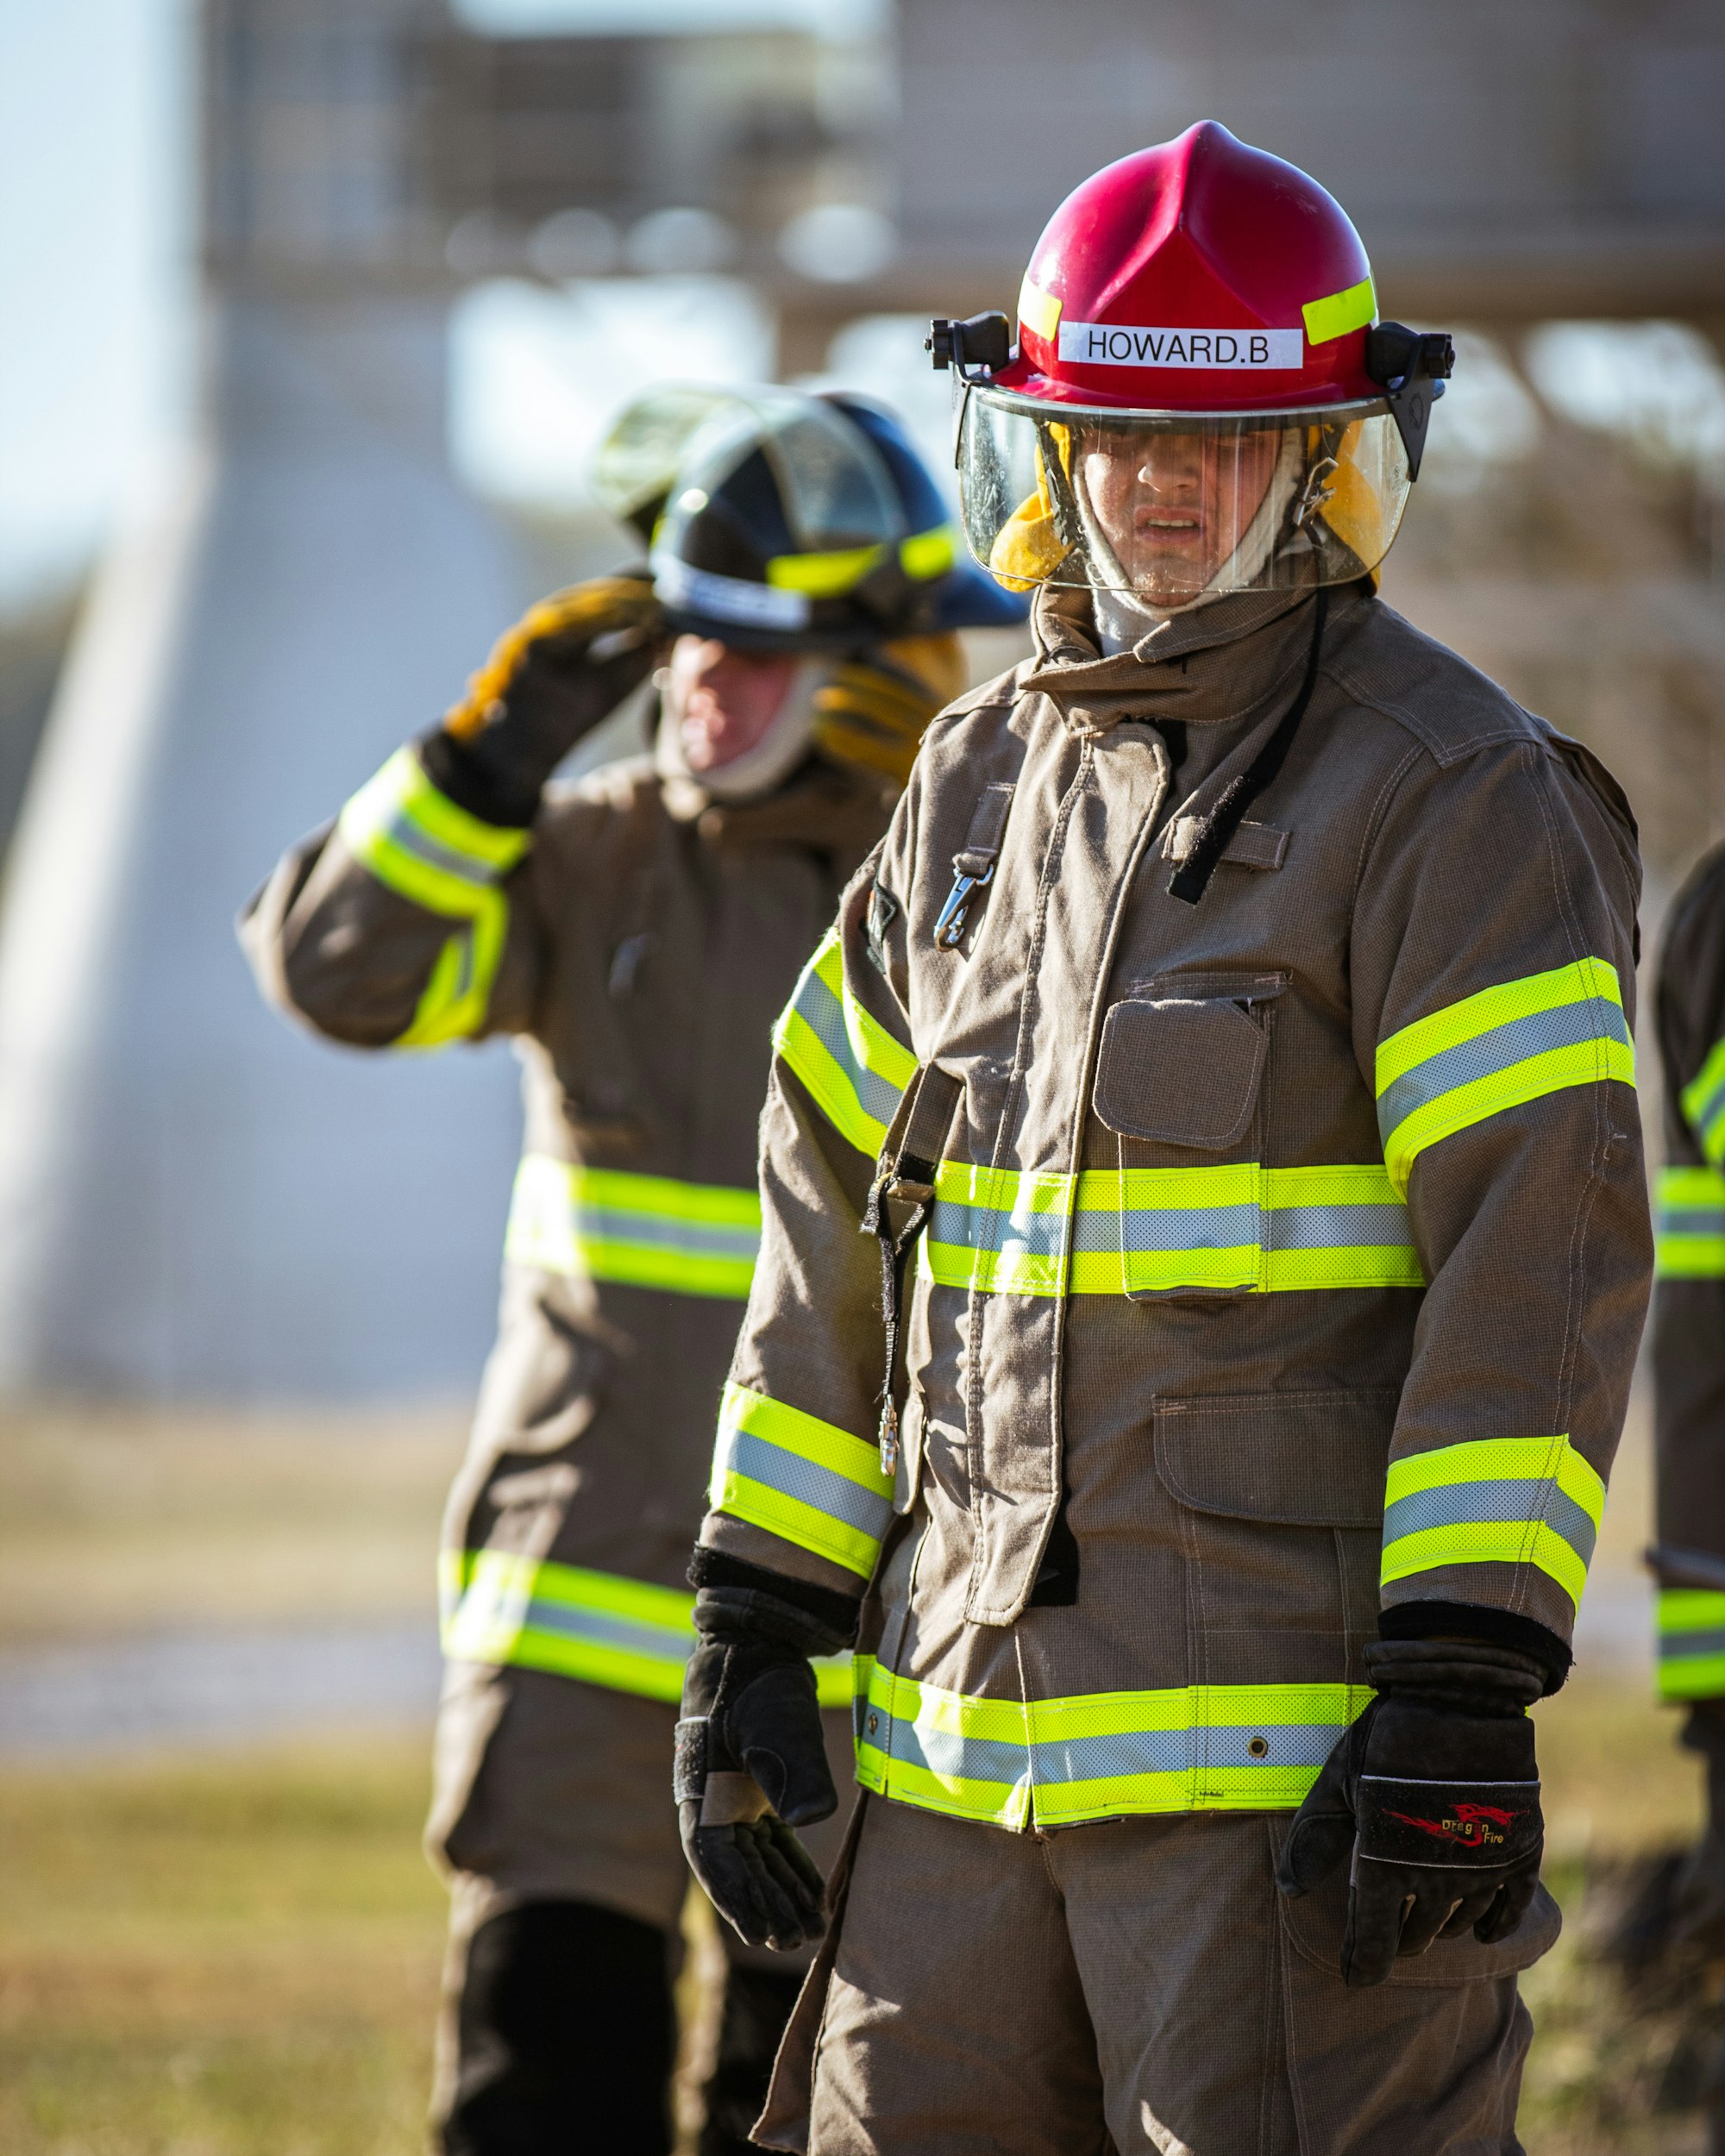 Digital tools for firefighters and other do-gooders.